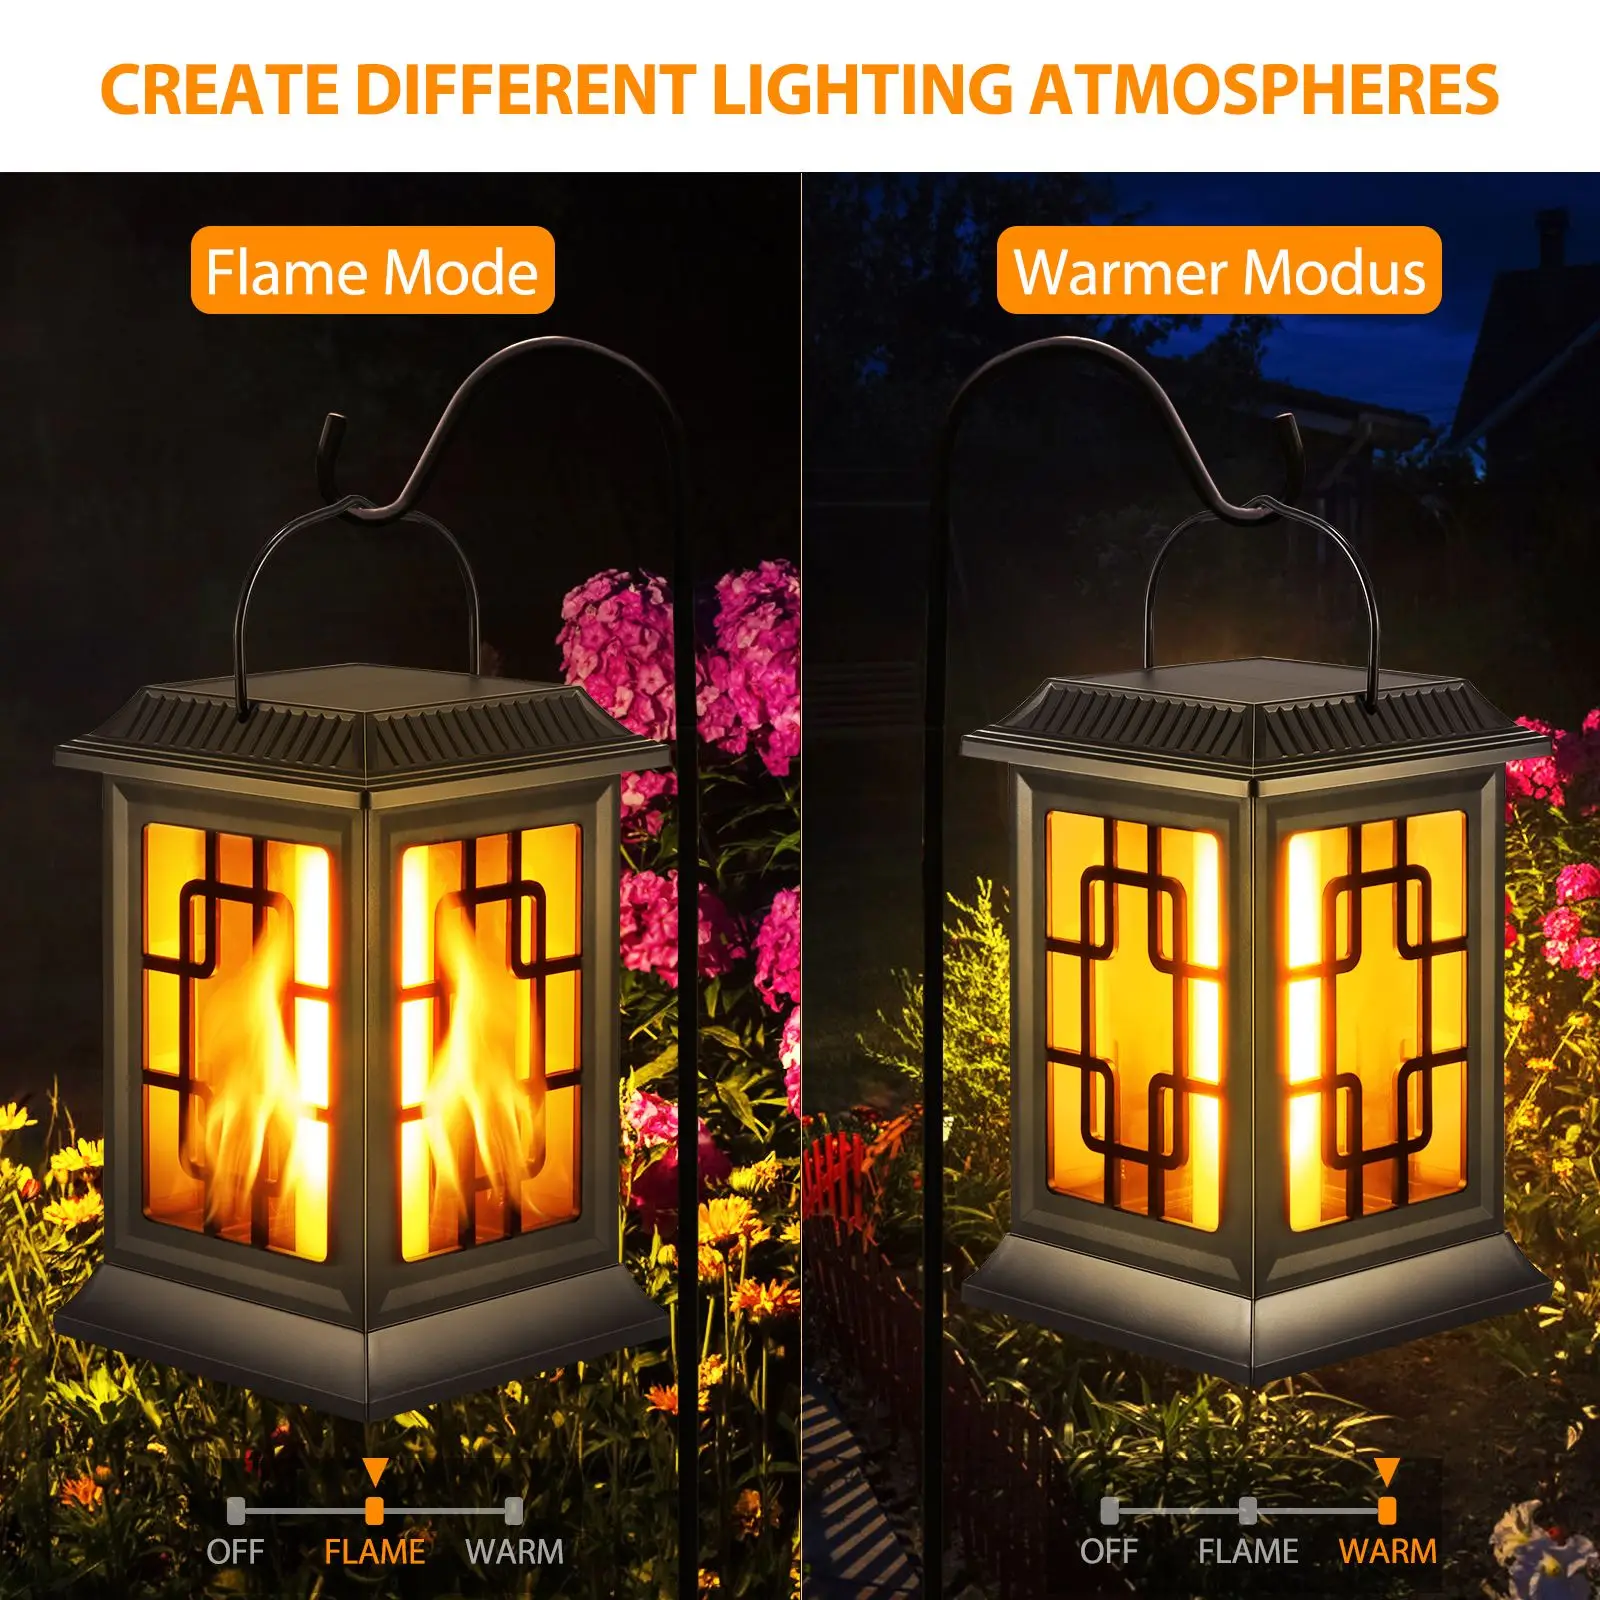 Solar Lantern Light 38LED Waterproof Portable Garden Decor Hanging Lights Outdoor Yard Festival Atmosphere Landscape Solar Lamp portable pyramid air humidifier usb remote control aromatherapy essential oil diffuser mini air humidifier atmosphere night lamp